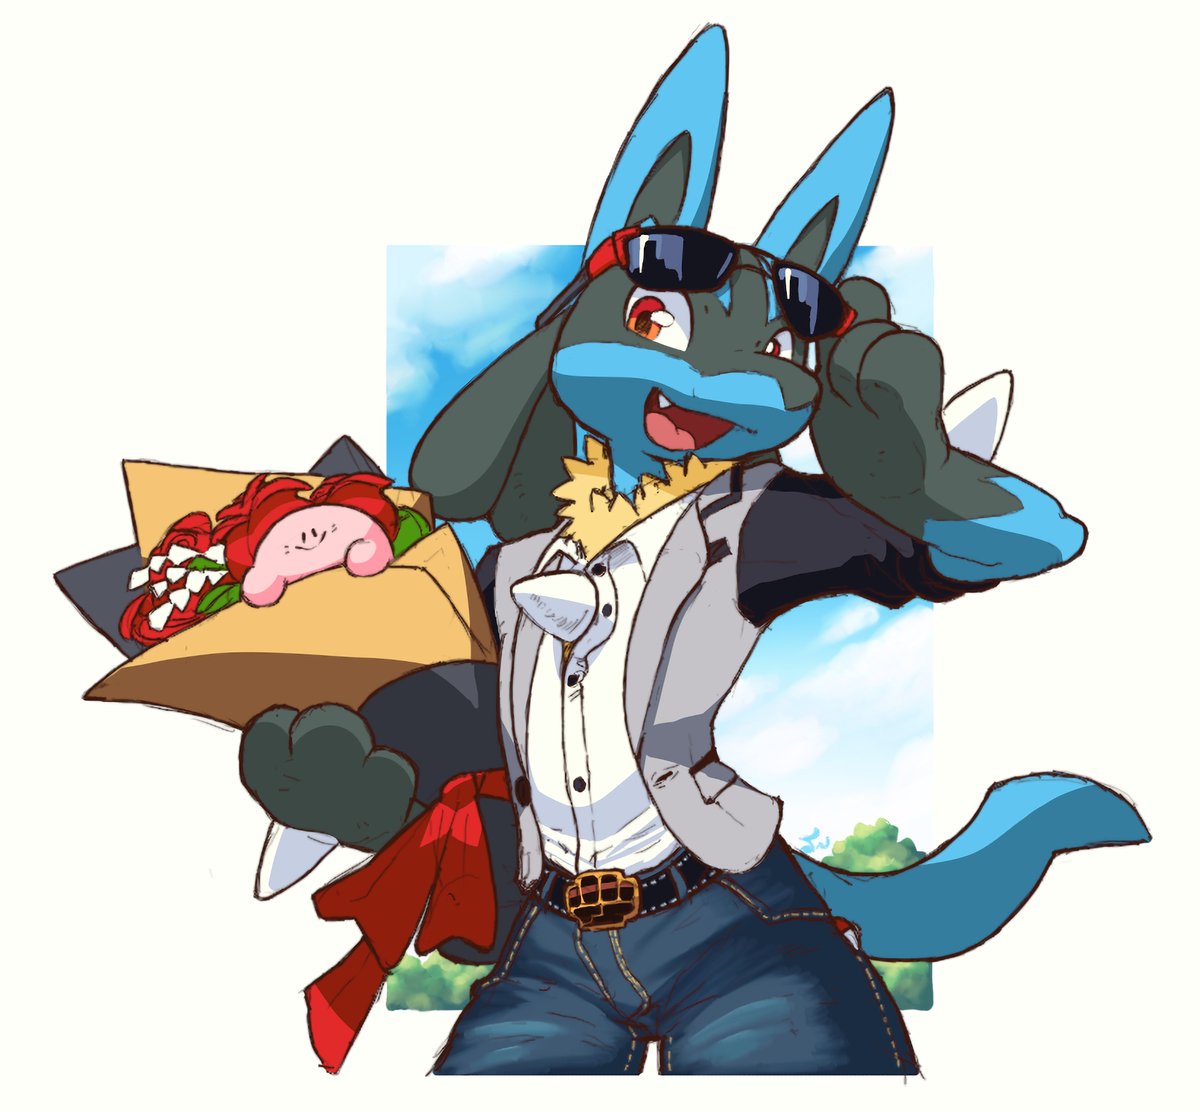 RT @DaHeckSaJerry: Happy early/late Valentine's Day!
Single? Lucario's got you cover- https://t.co/FyrM6SDy81